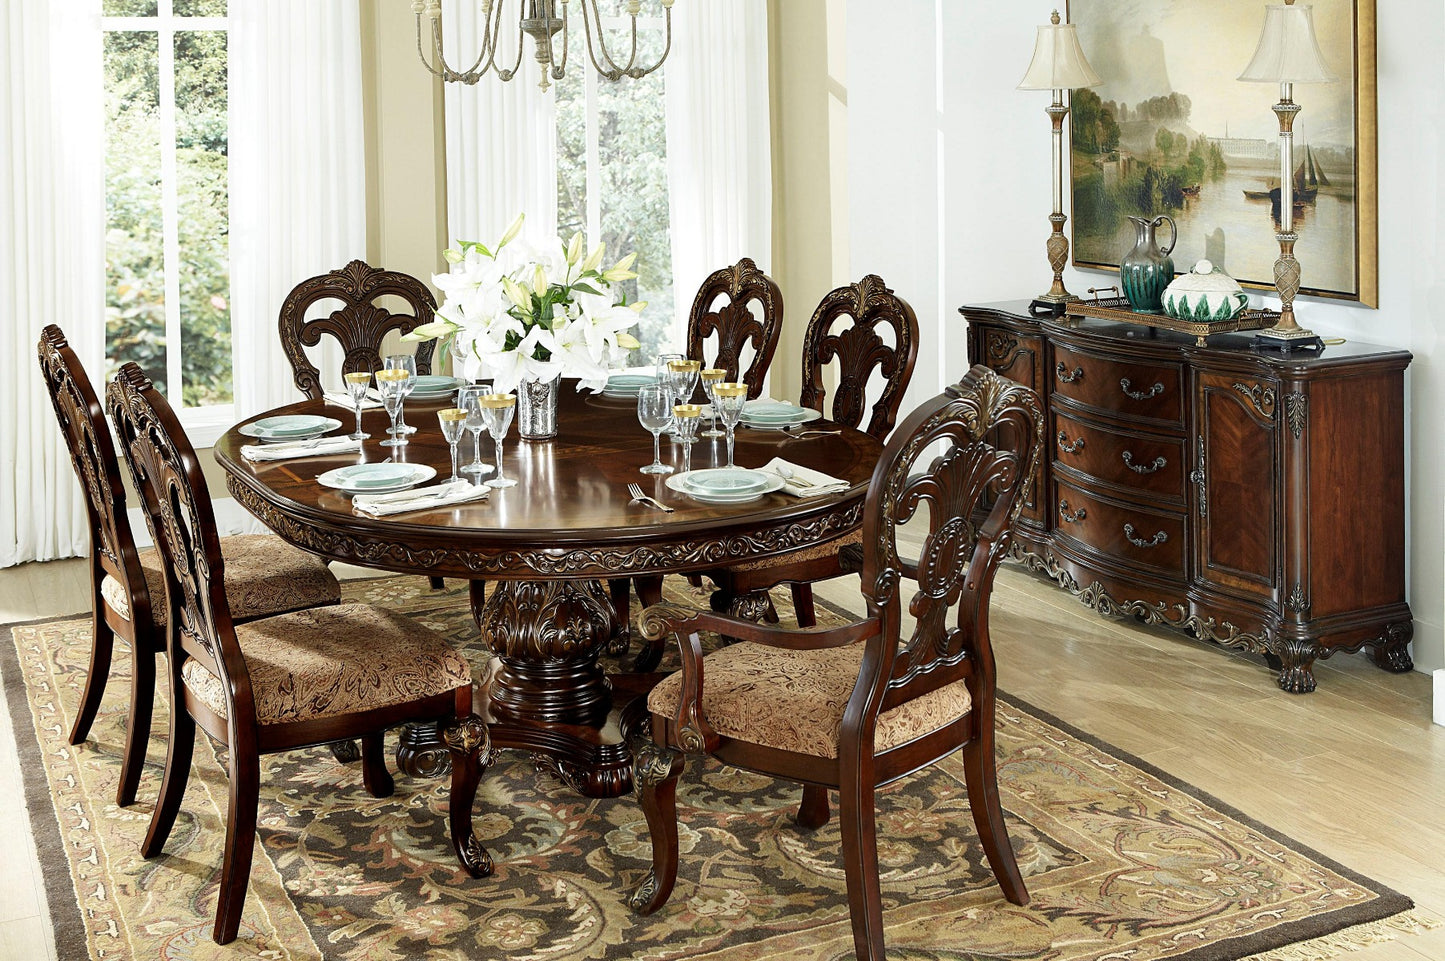 Deryn Park Round/Oval Dining Collection - European Styling